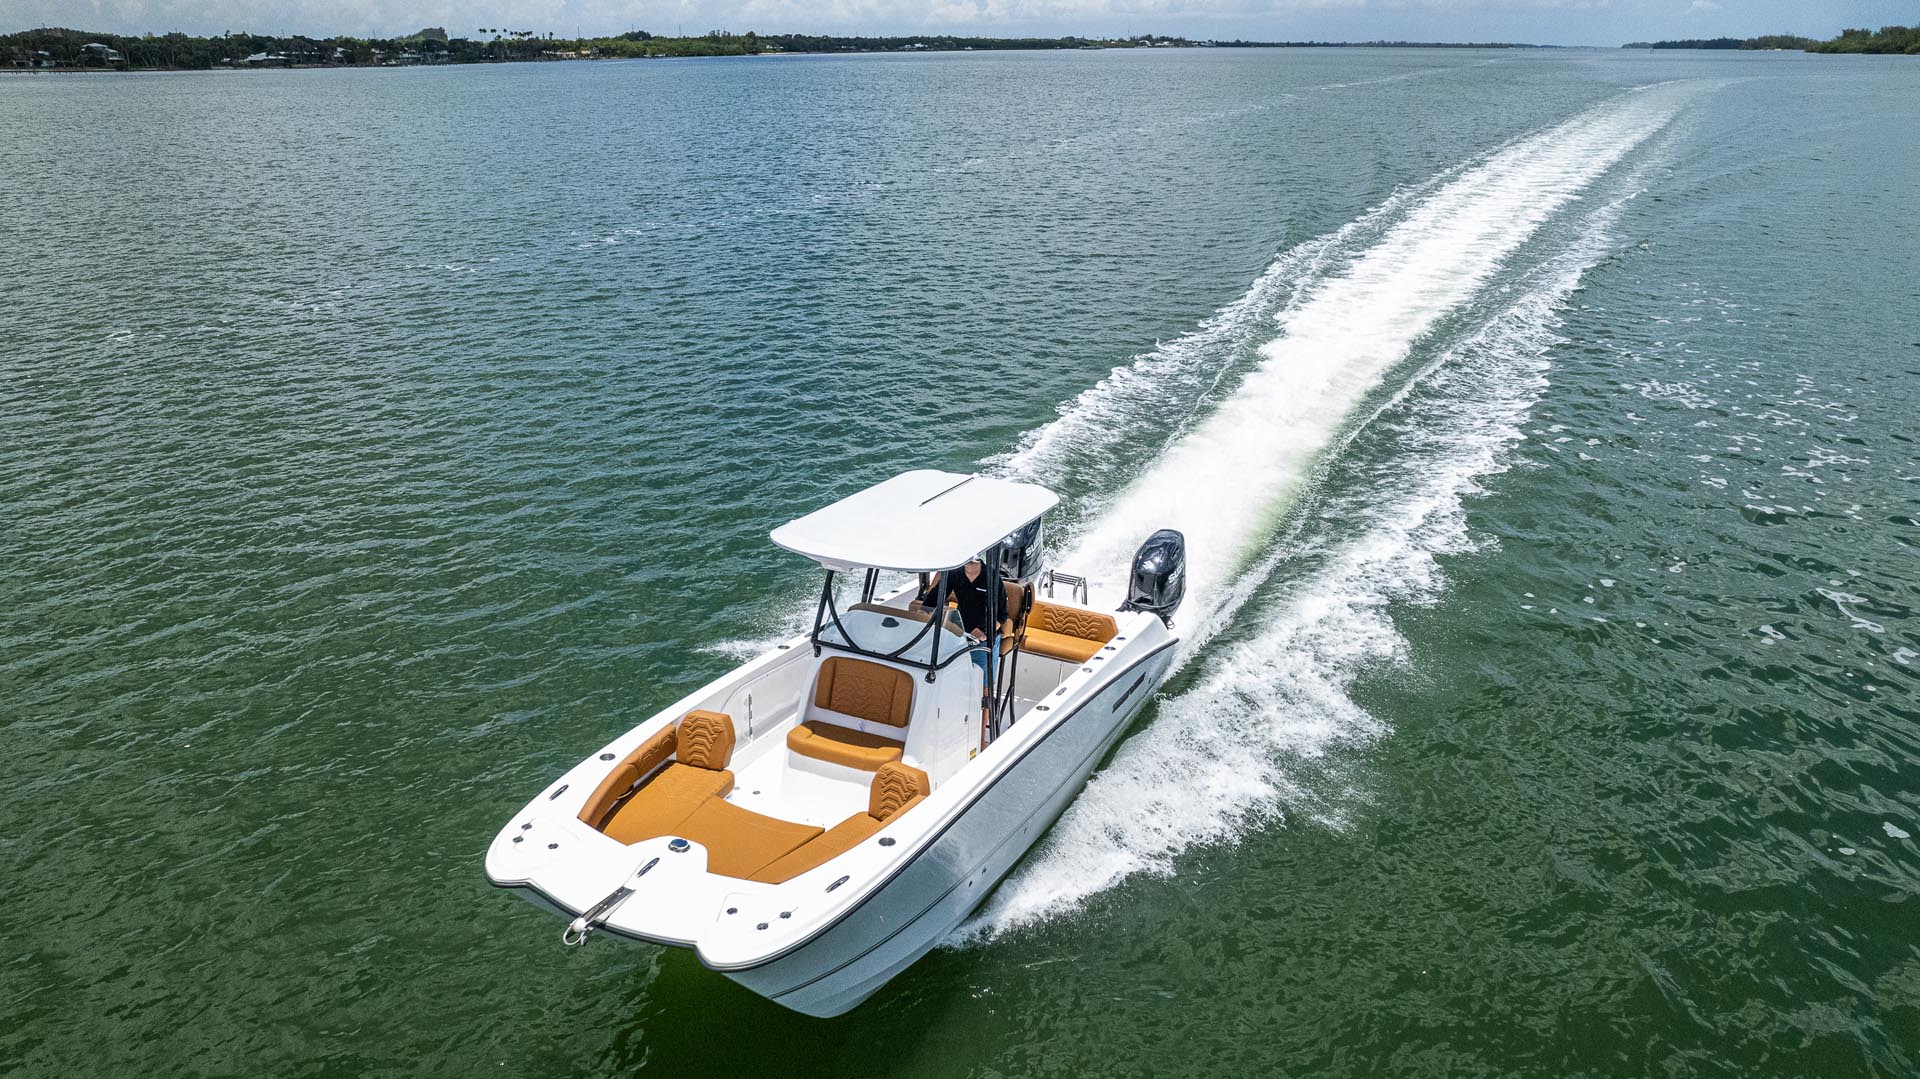 First Look – Twin Vee 240 Center Console